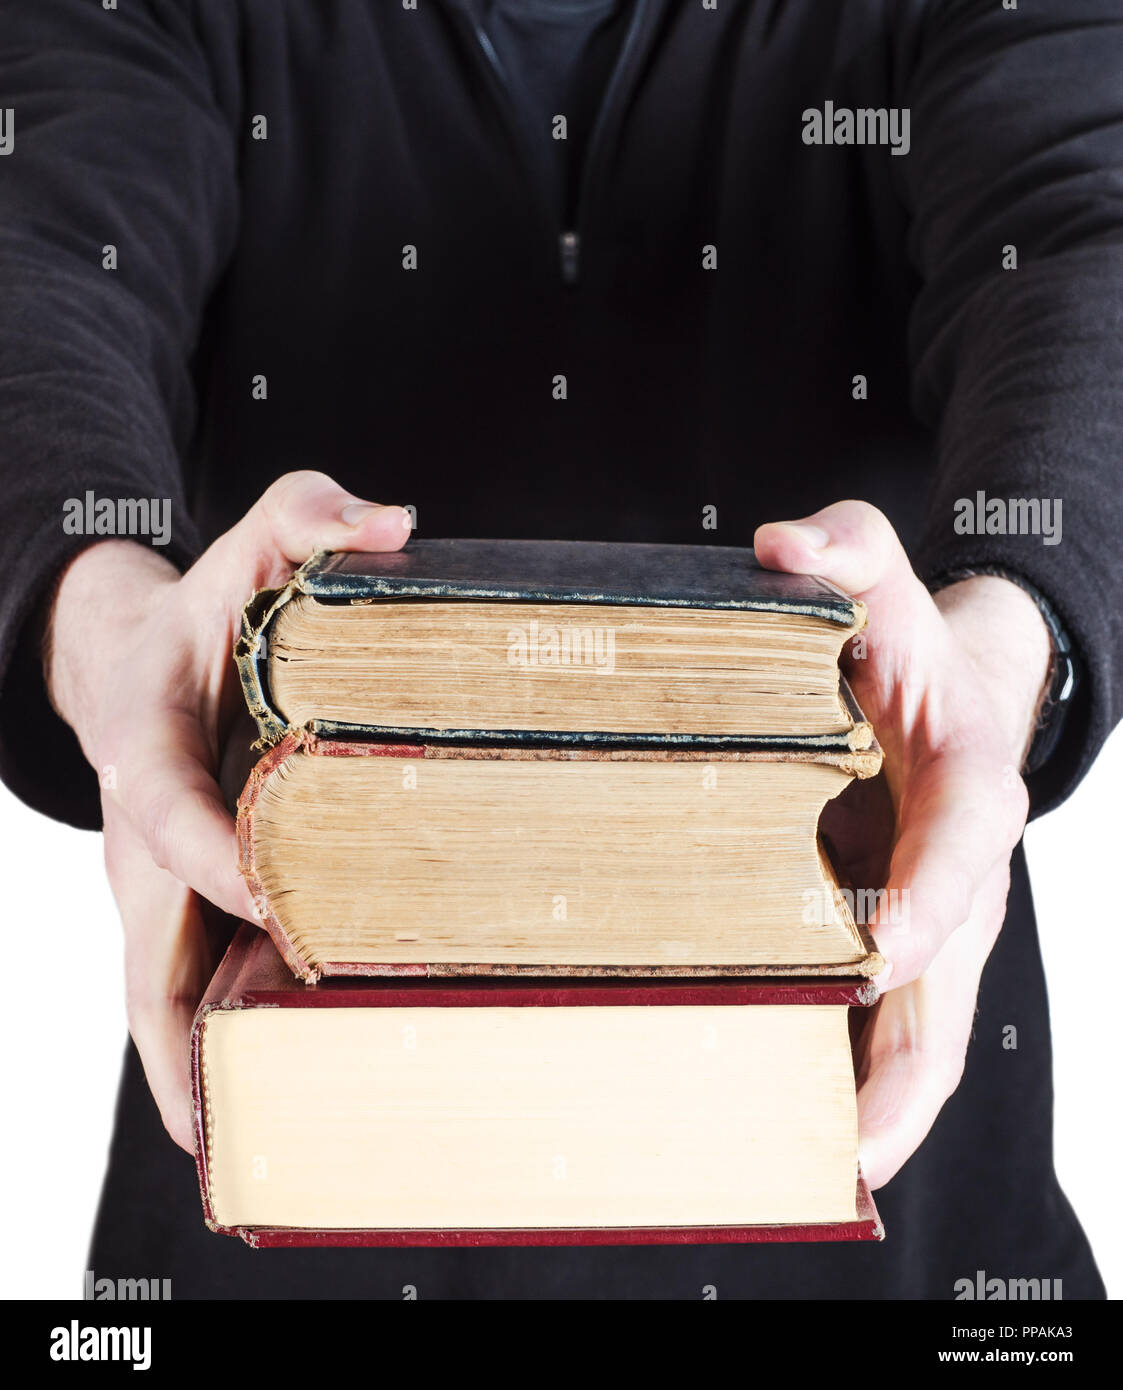 A pile of three old text books, handed forward to viewer by man in dark casual clothing. Stock Photo